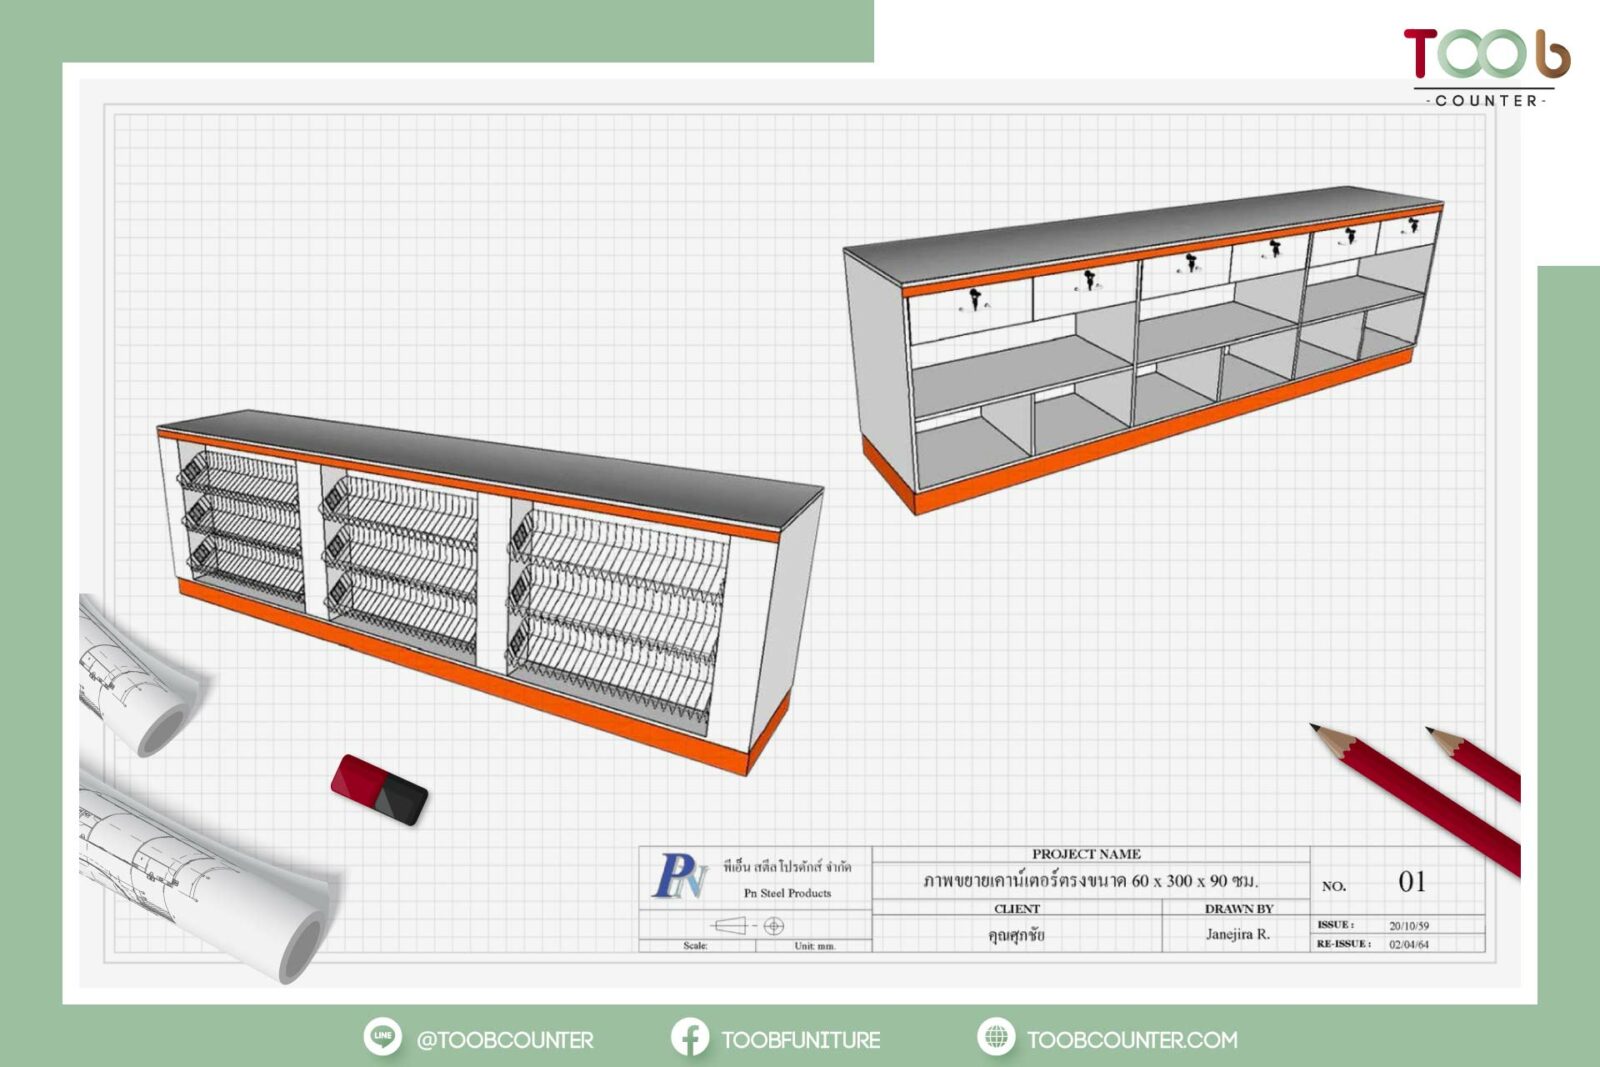 Drawing perspective view design single i shaped cashier counter